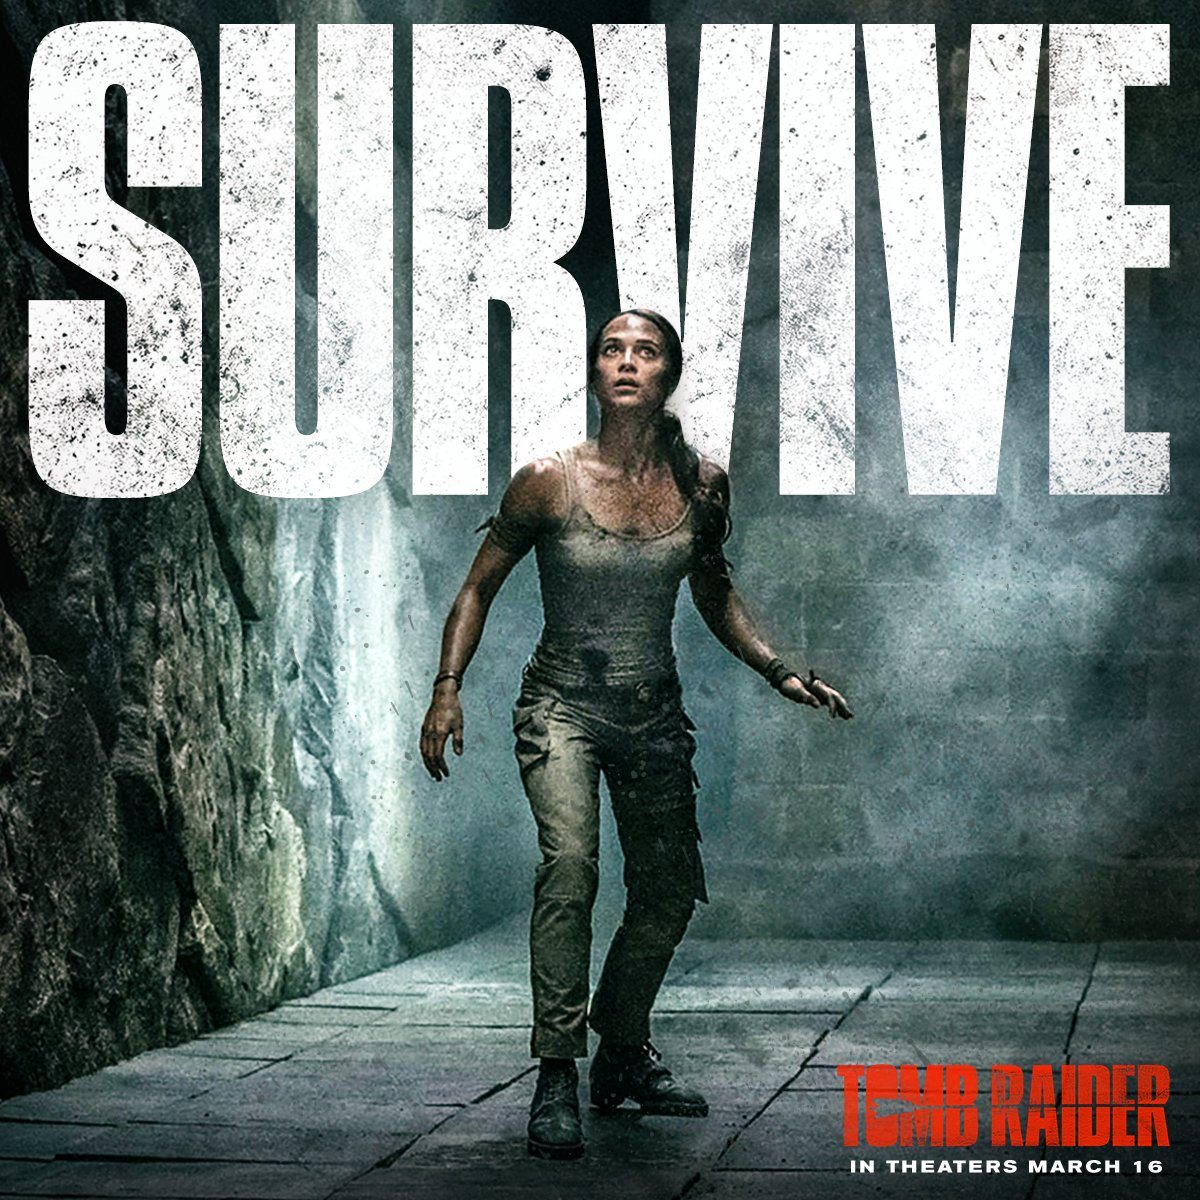 The Tomb Raider movie gets a new promo poster